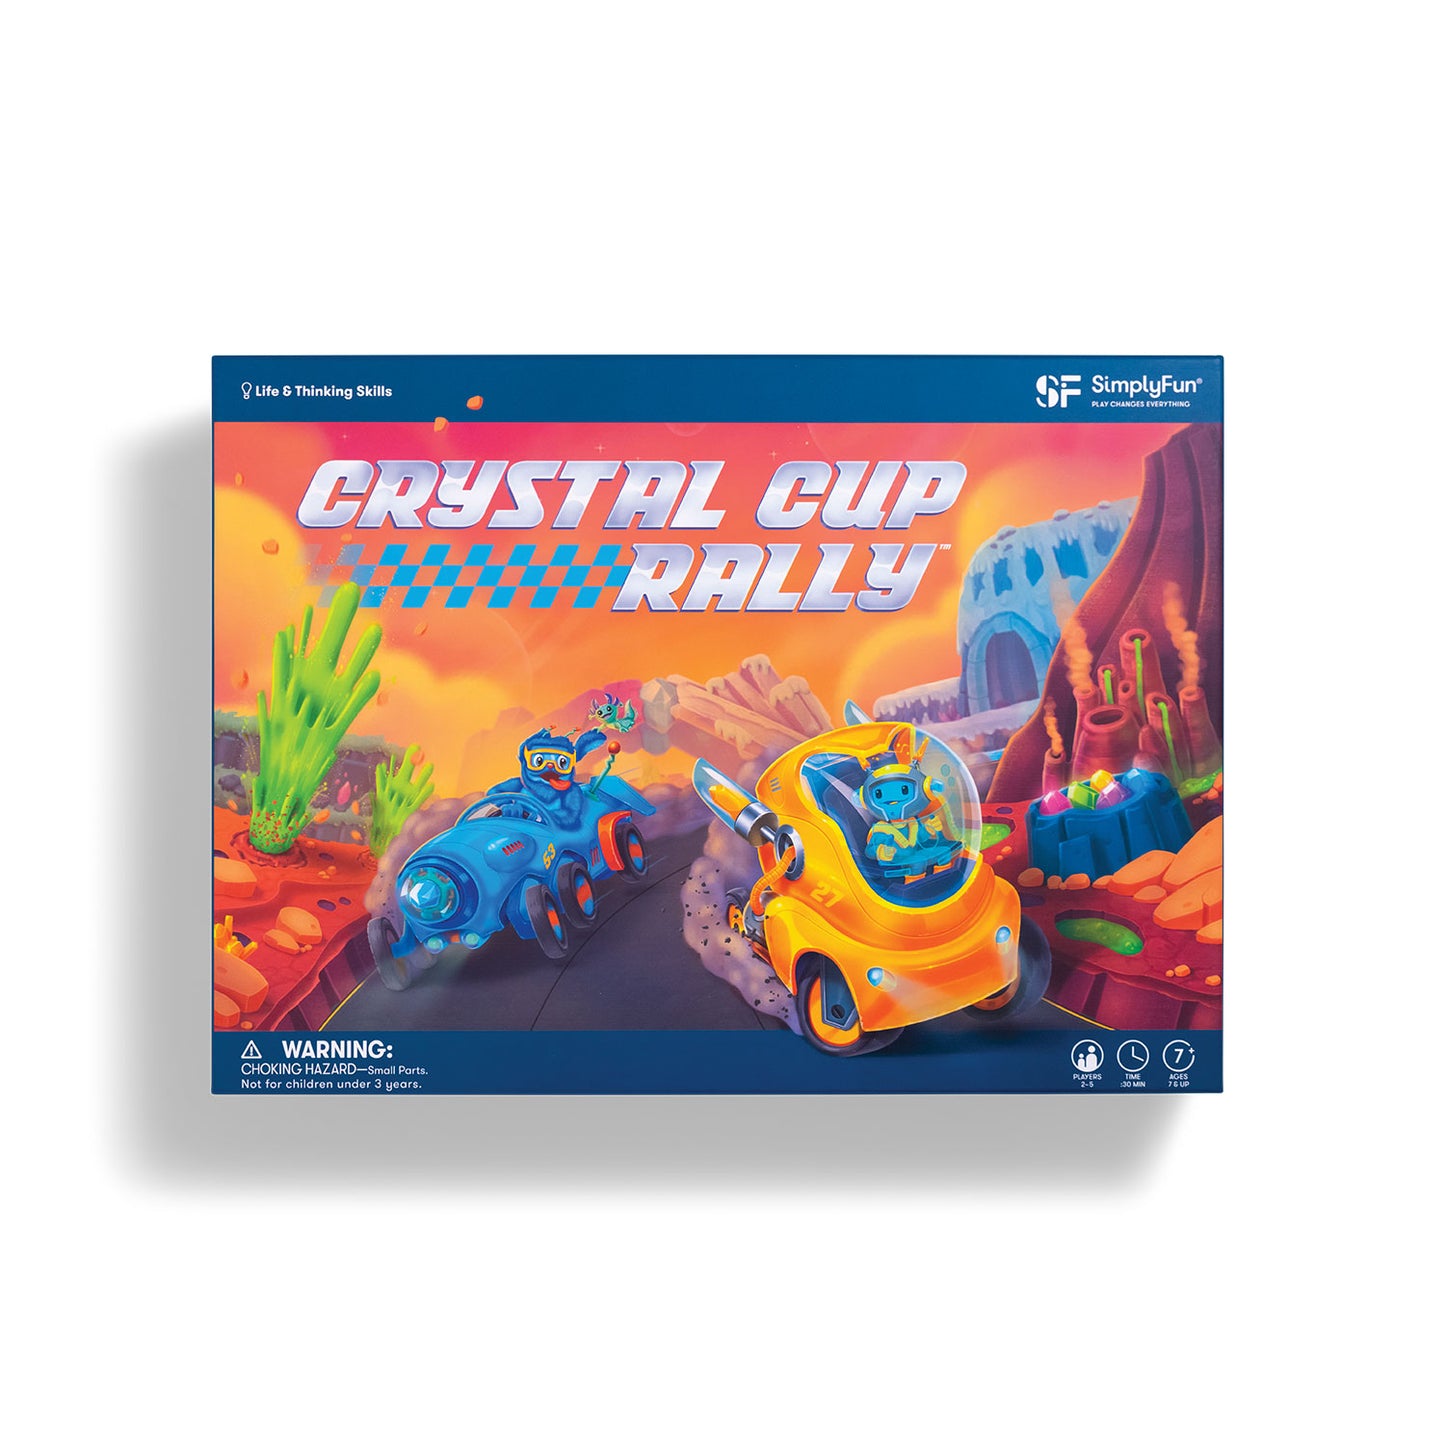 Crystal Cup Rally by SimplyFun is a fun space game focusing on decision making and adaptability for ages 7 and up